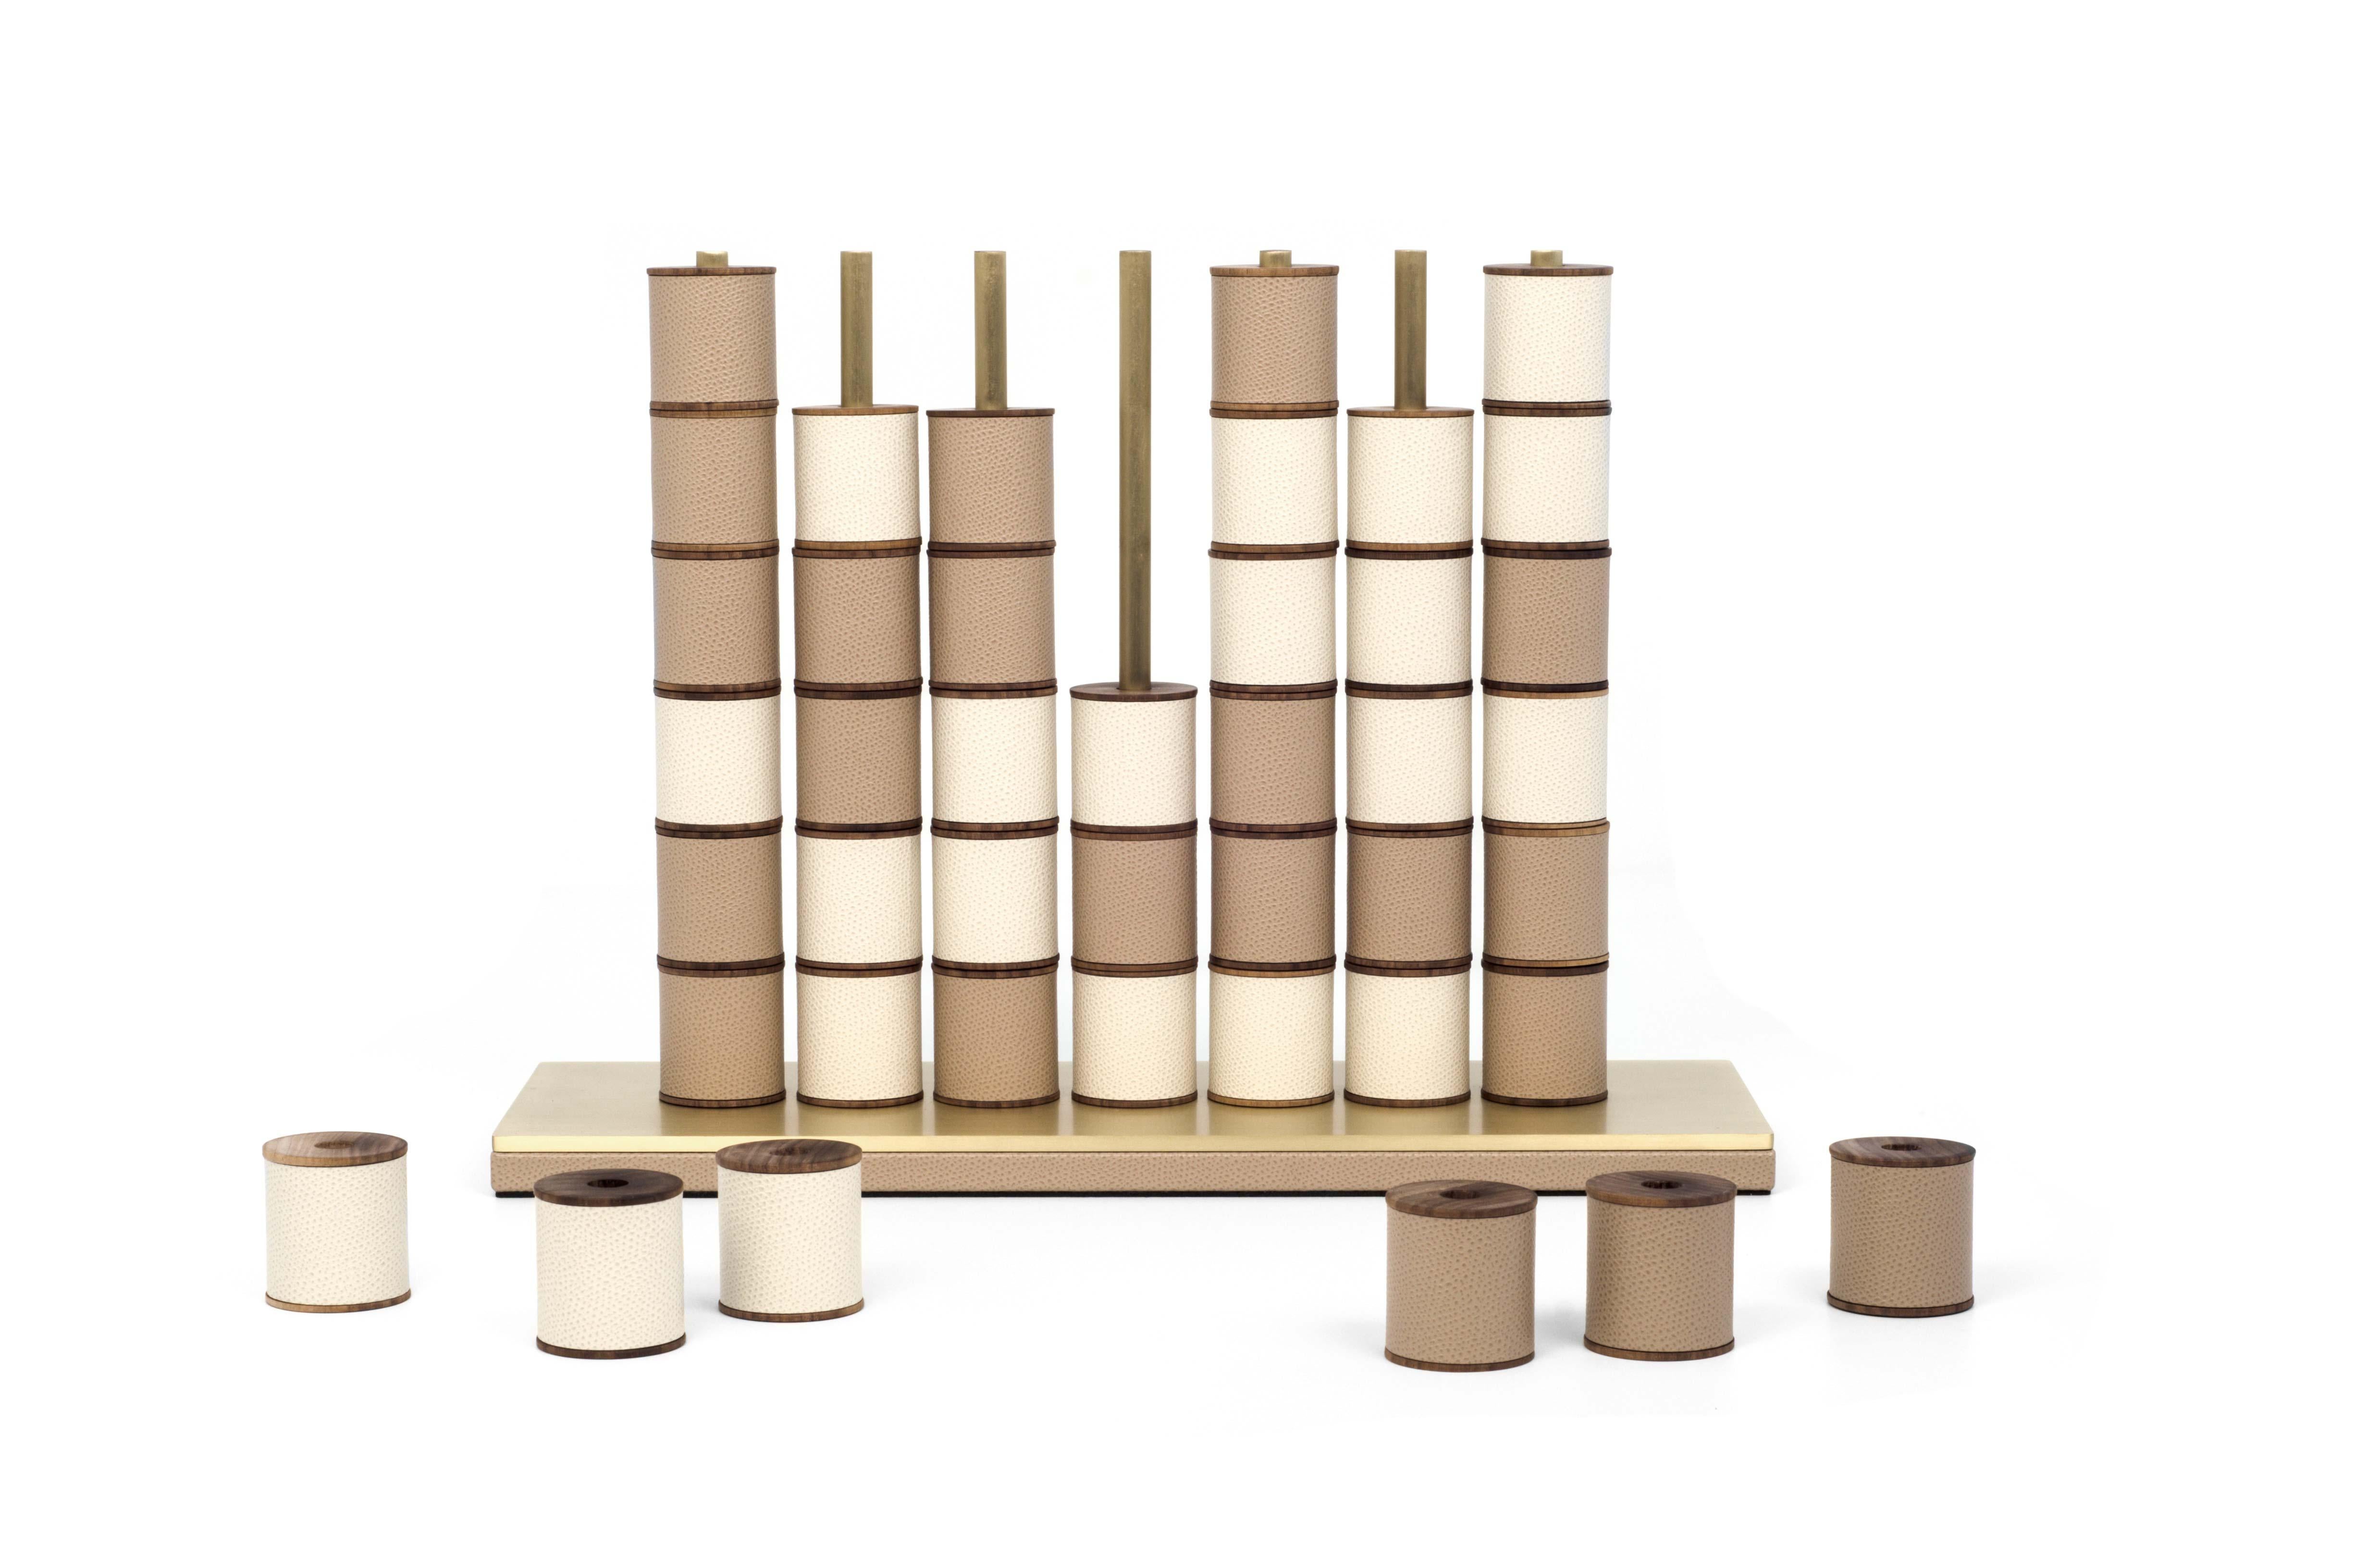 One-of-a-kind set ready for your enjoyment.

Pinetti Connect 4 is something exclusive. Forty two wooden pieces covered in a bicolour soft leather that neatly fit on satin brass bars. Four in a row remain the goal, but we take your game to a